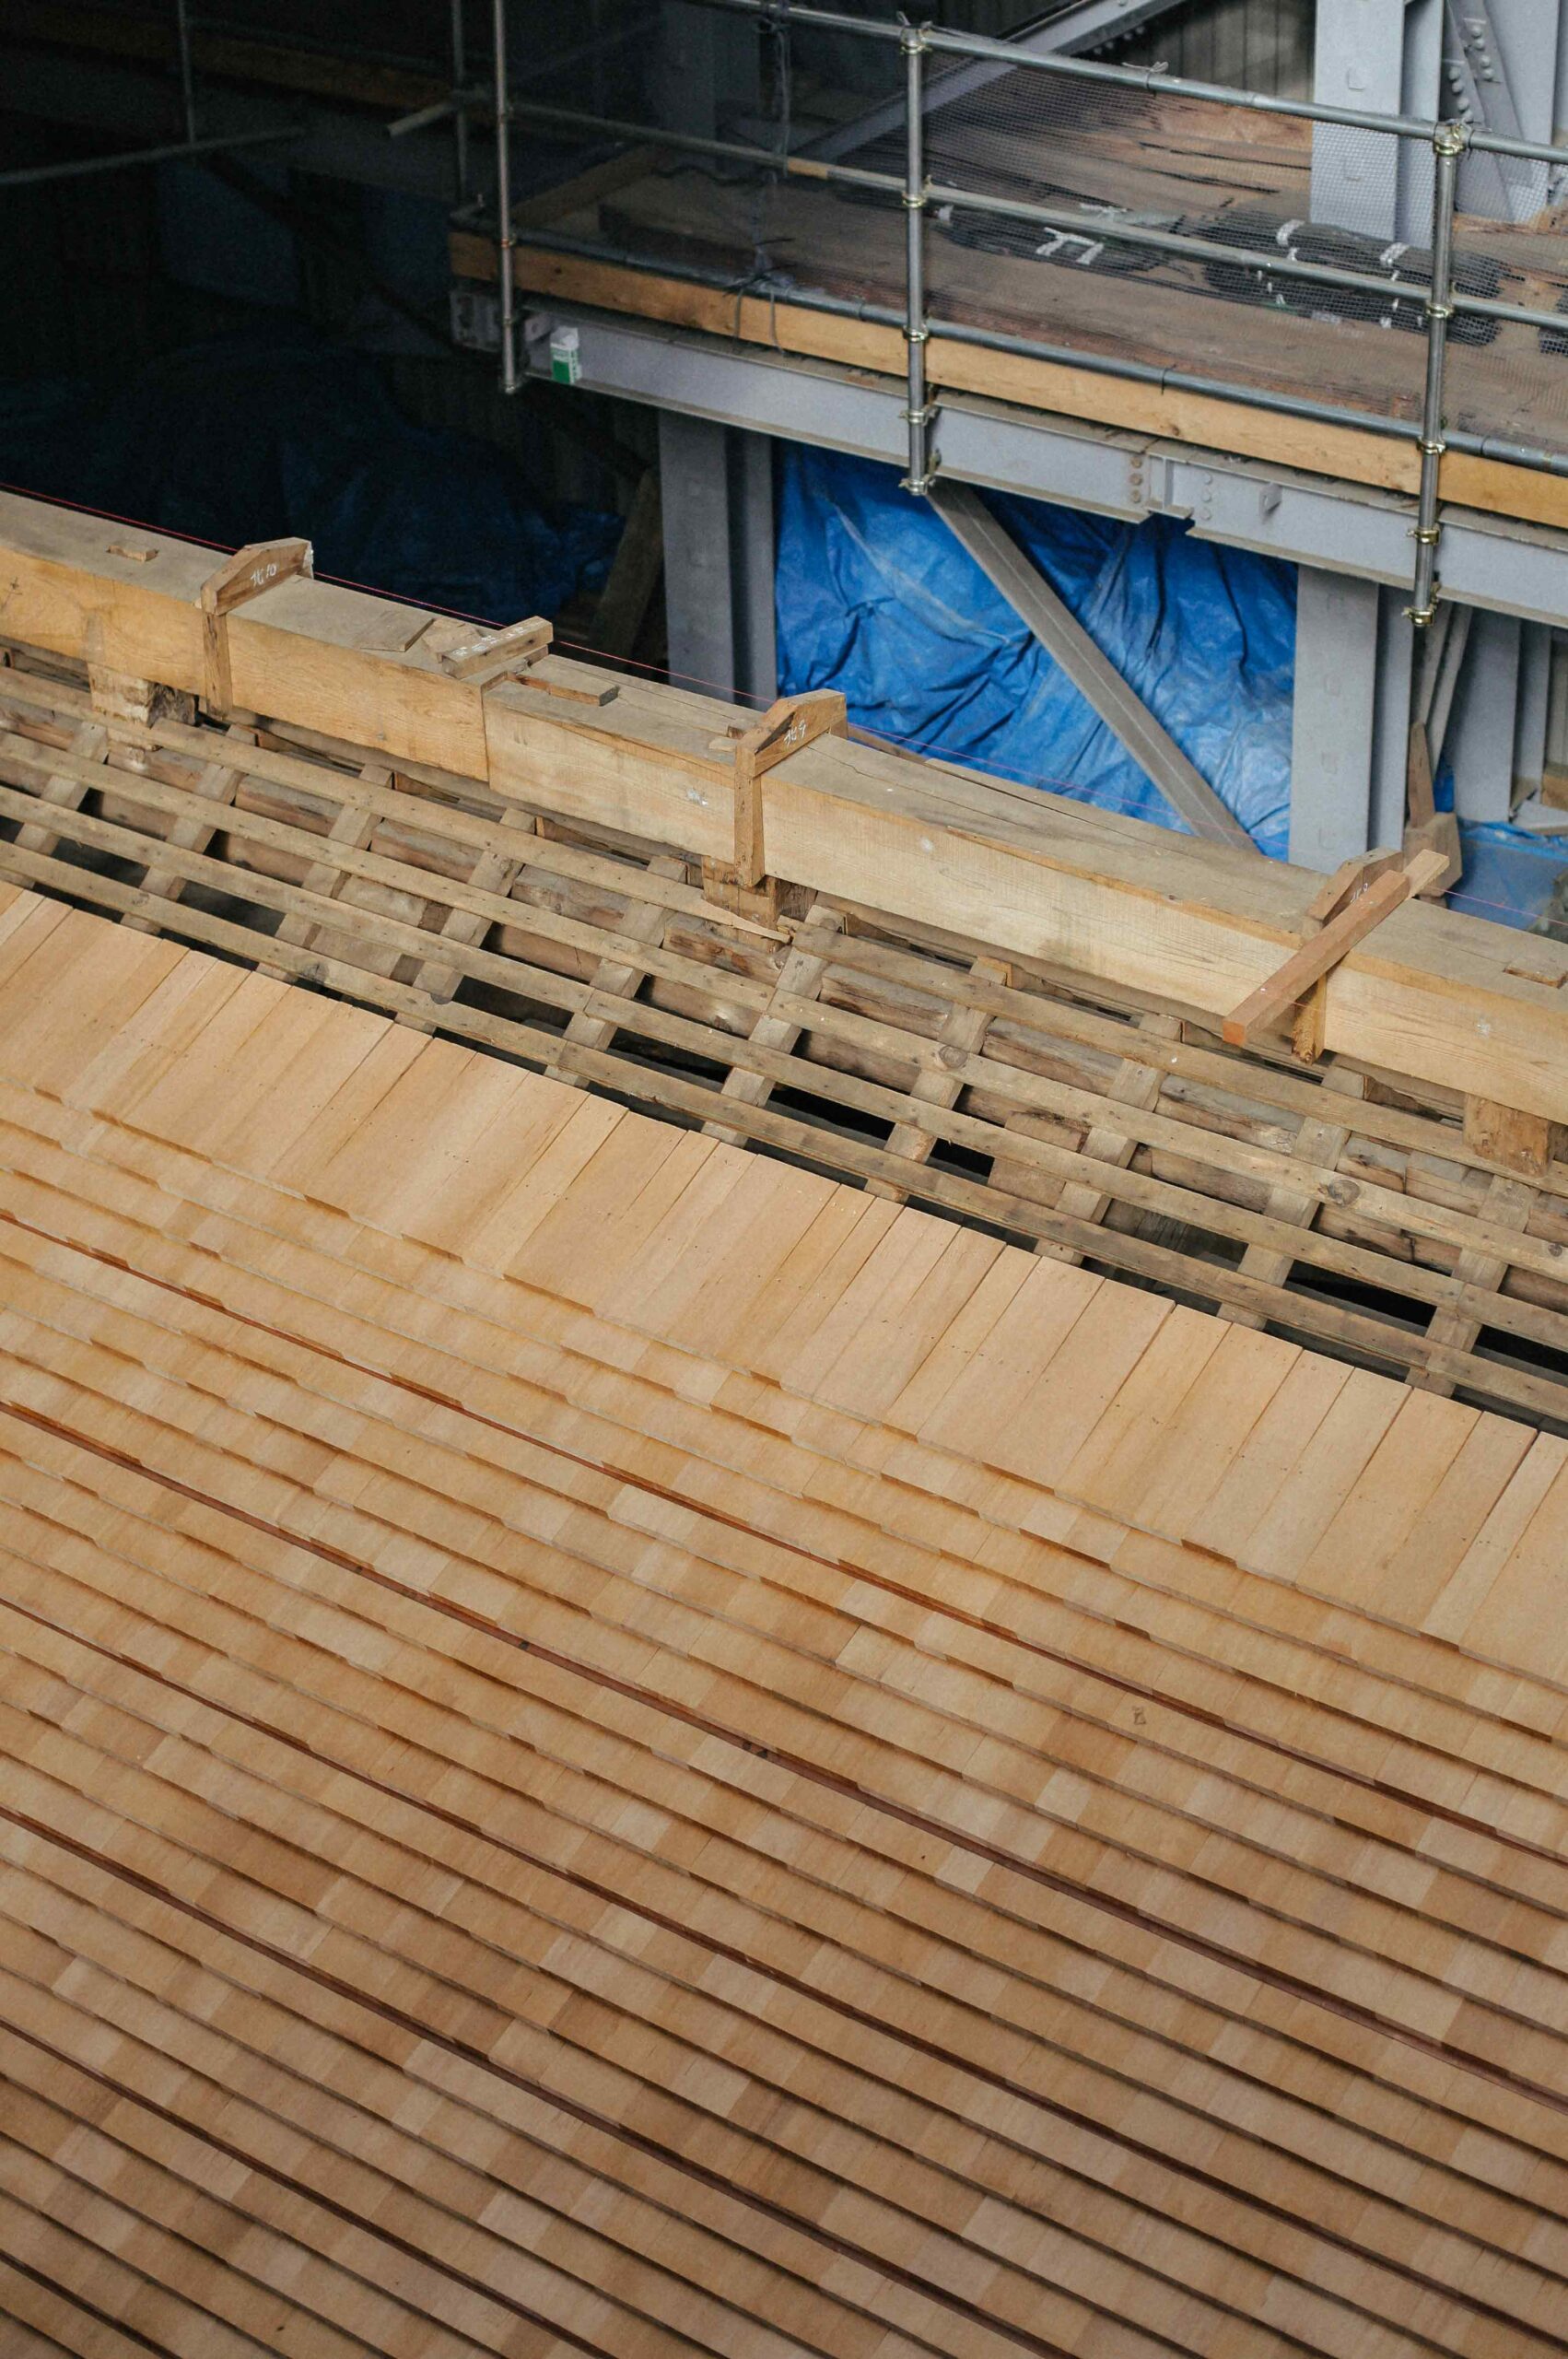 Opportunities to better understand the complex processes behind Japanese joinery abound.